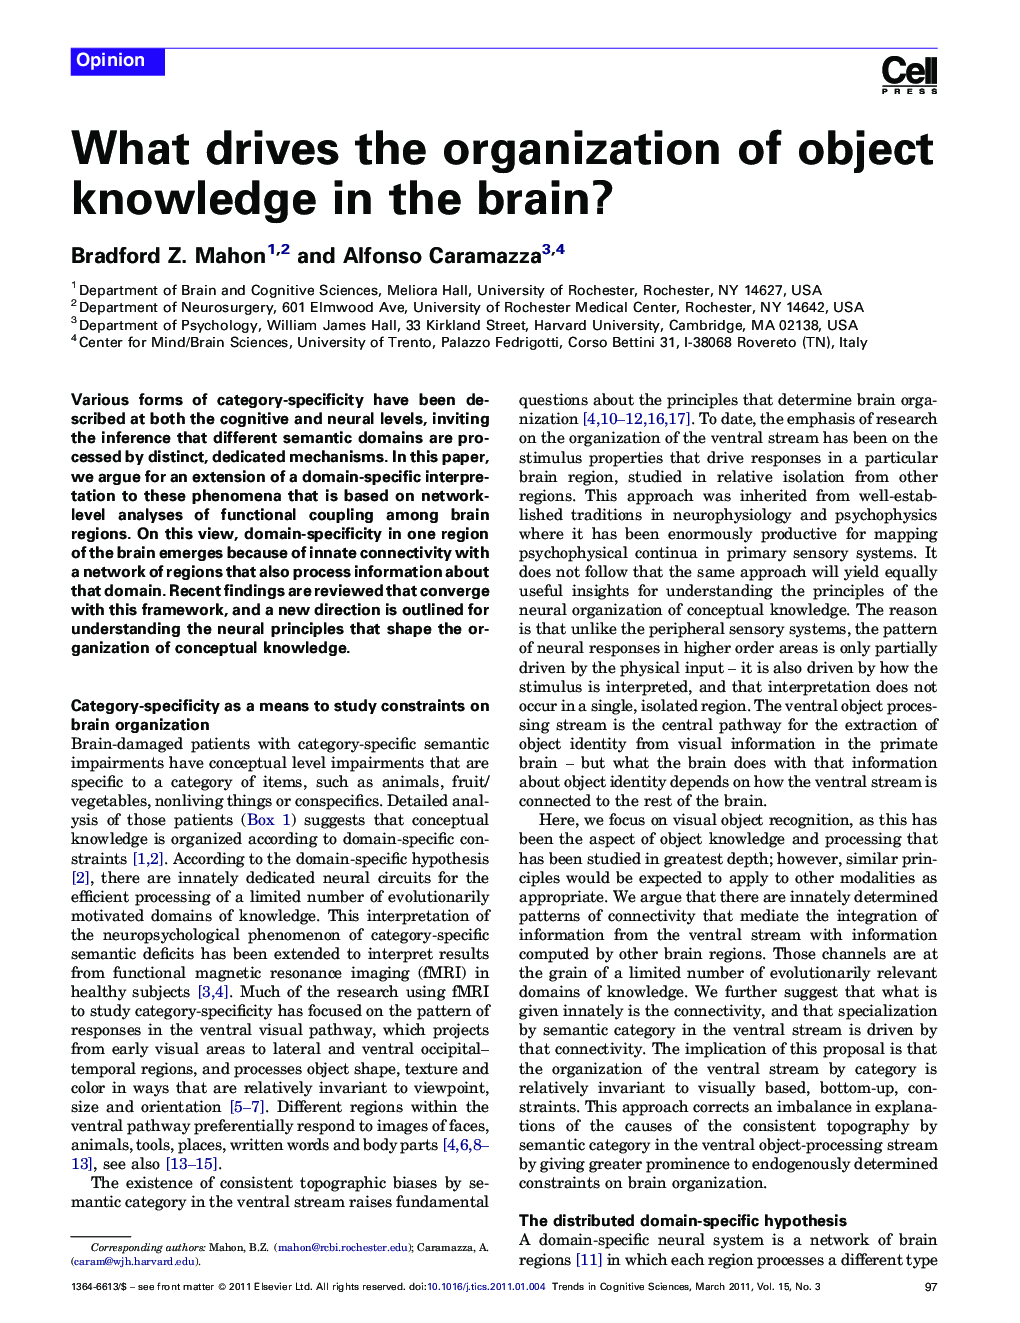 What drives the organization of object knowledge in the brain?